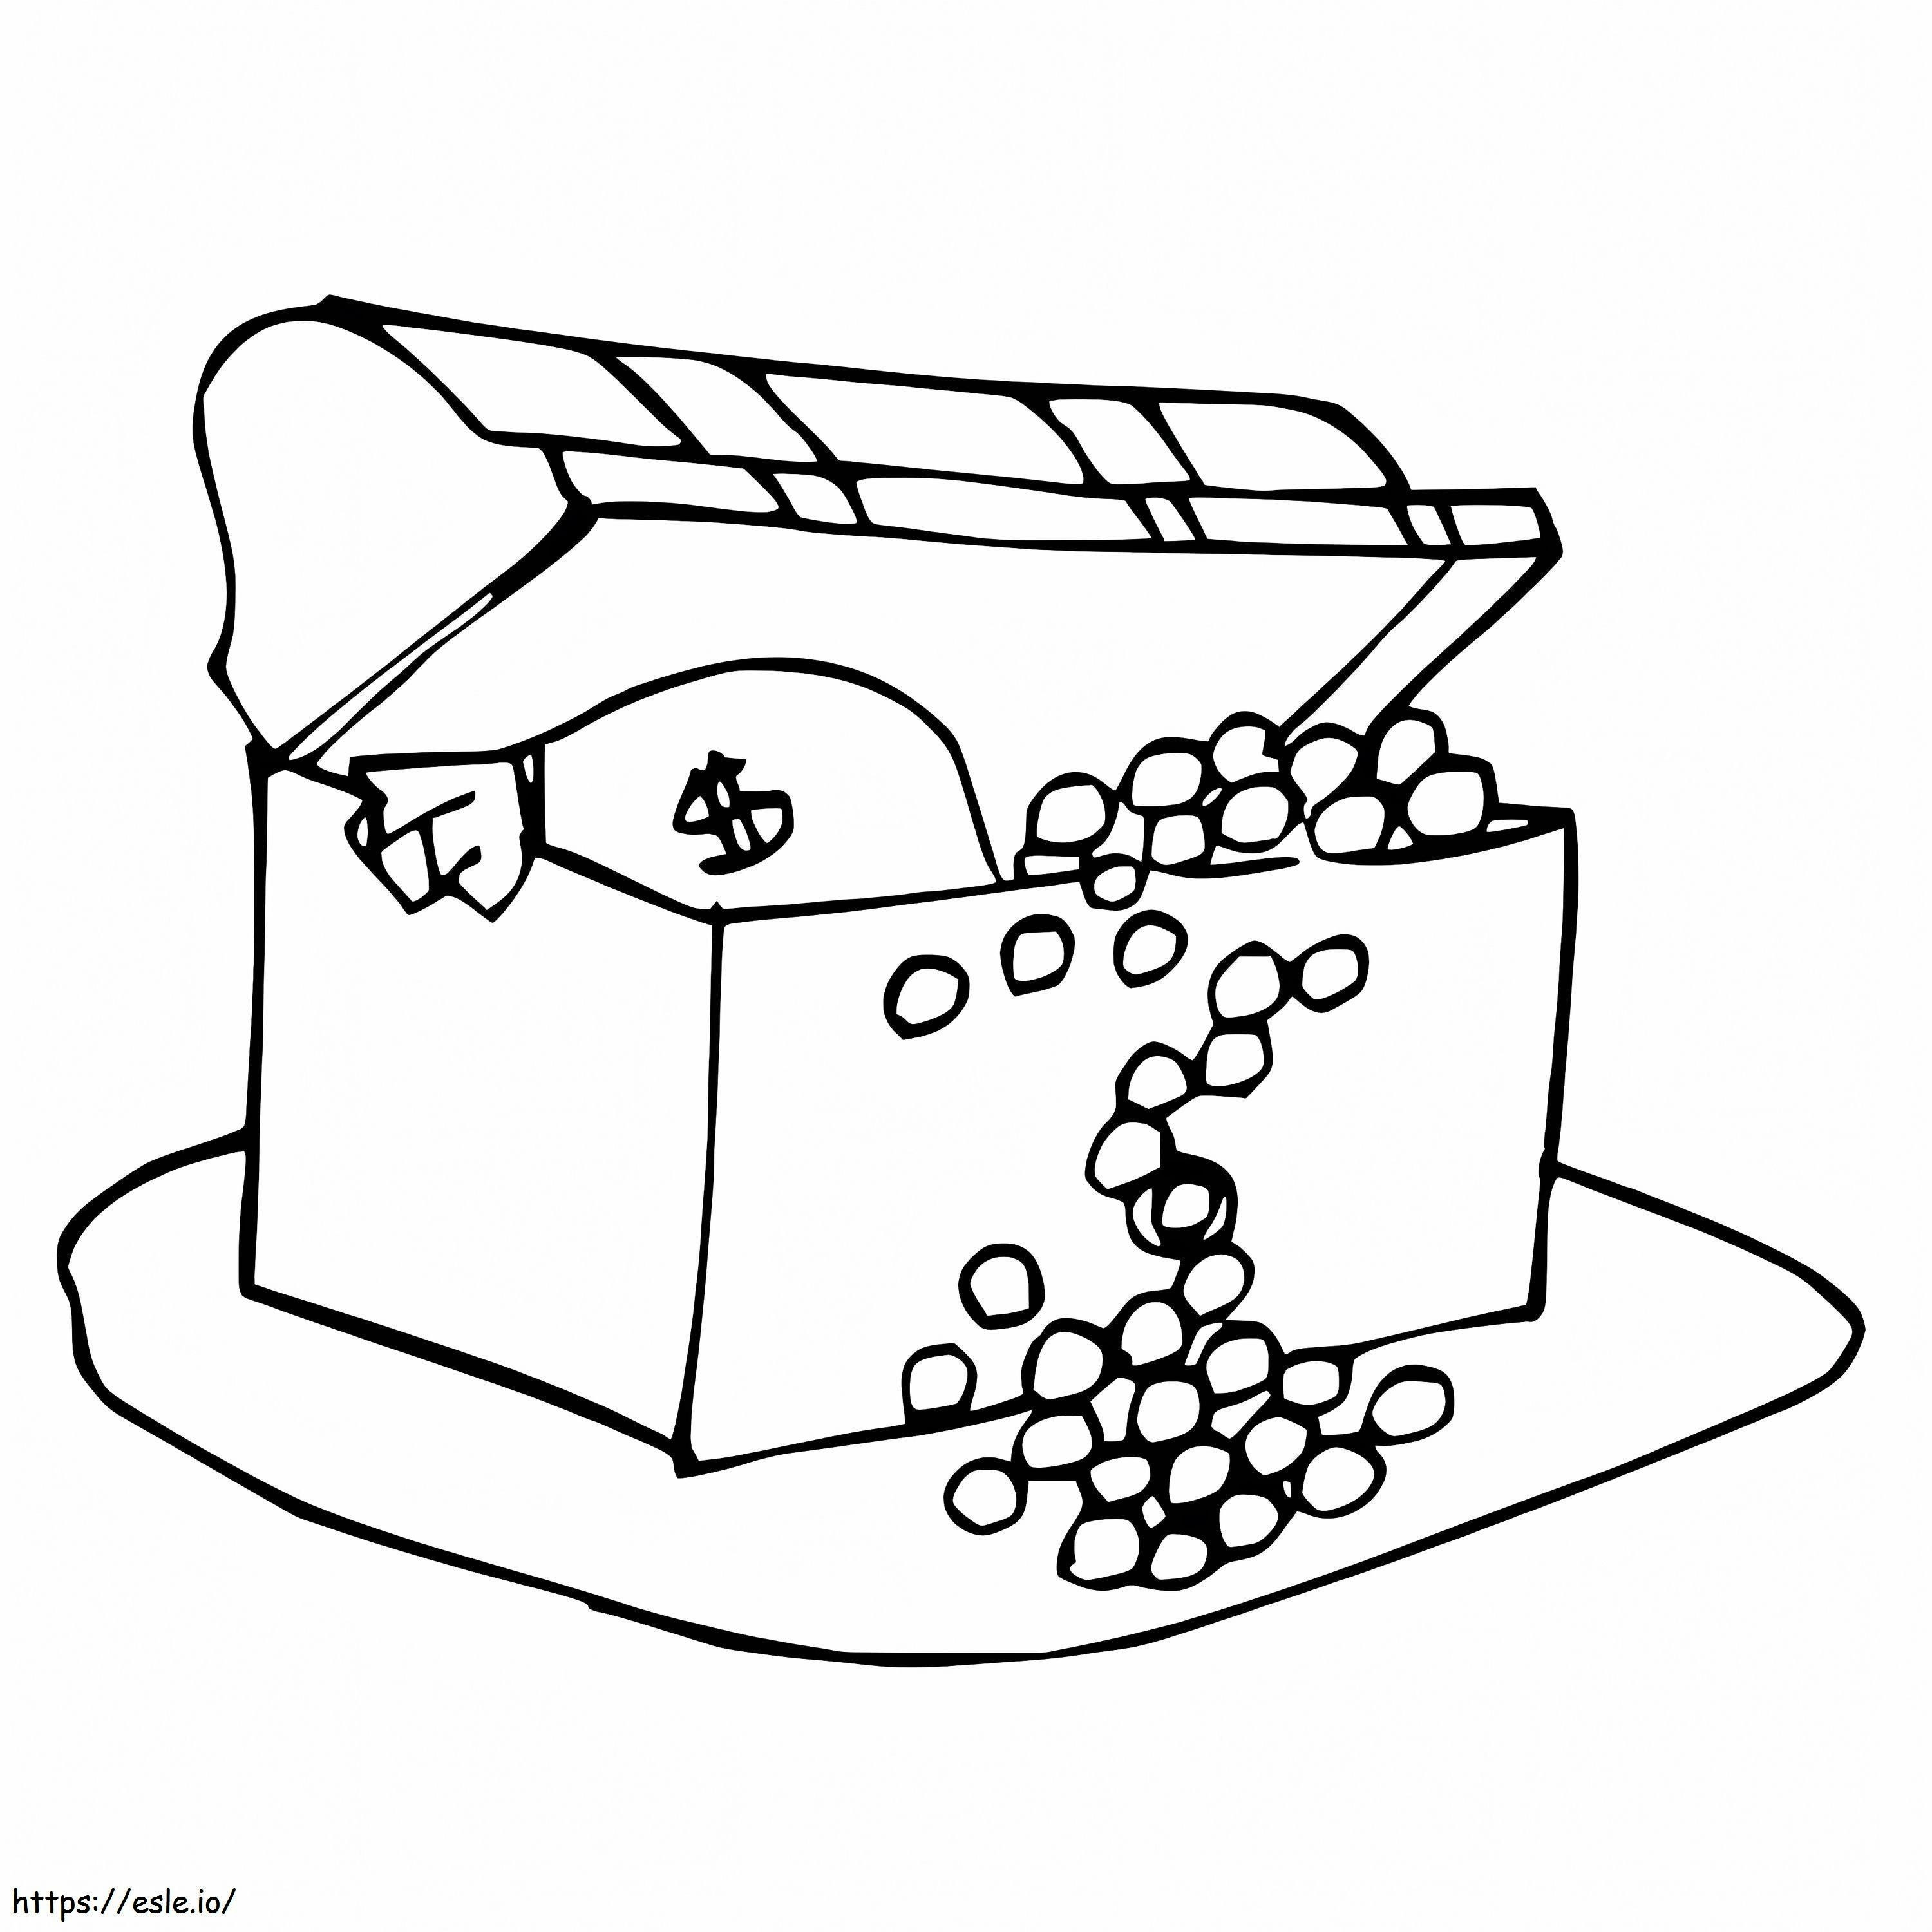 Treasure Chest 1 coloring page